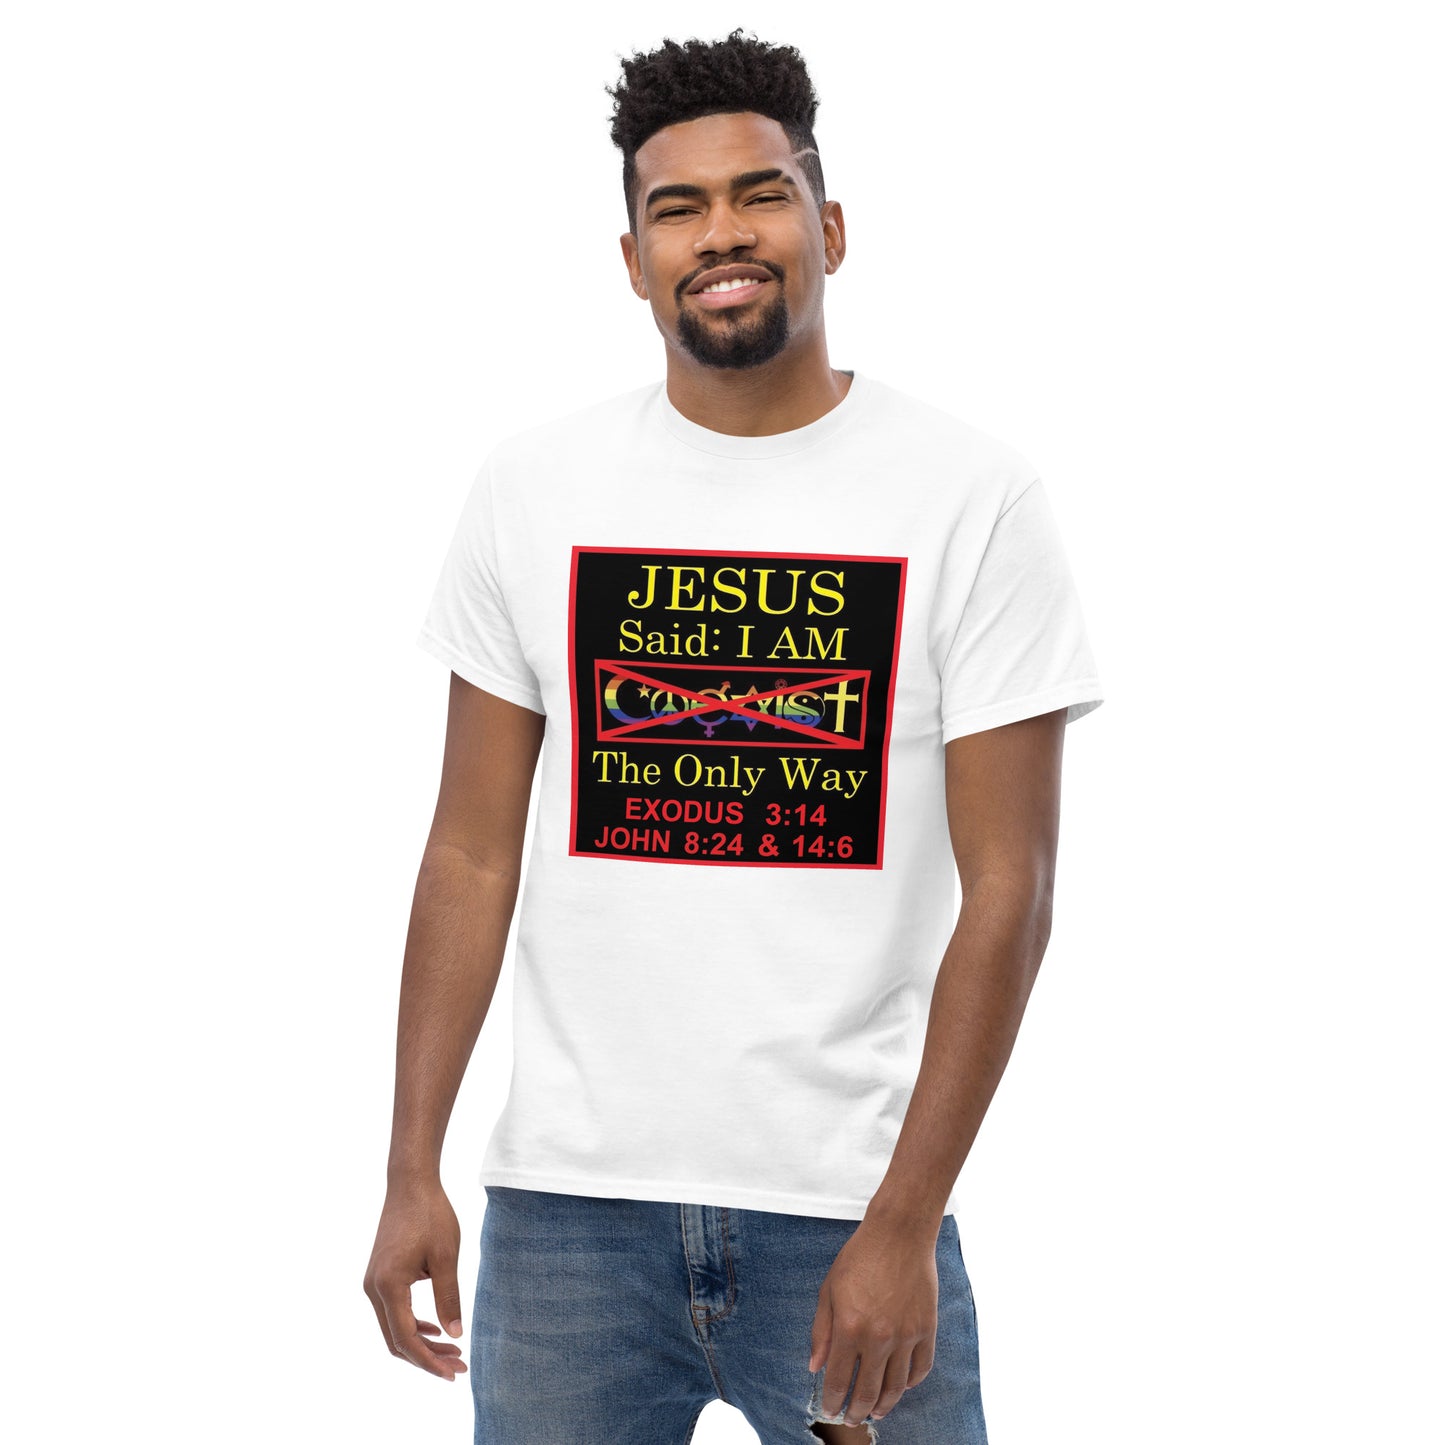 JESUS SAID I'AM THE ONLY WAY | Men's classic tee